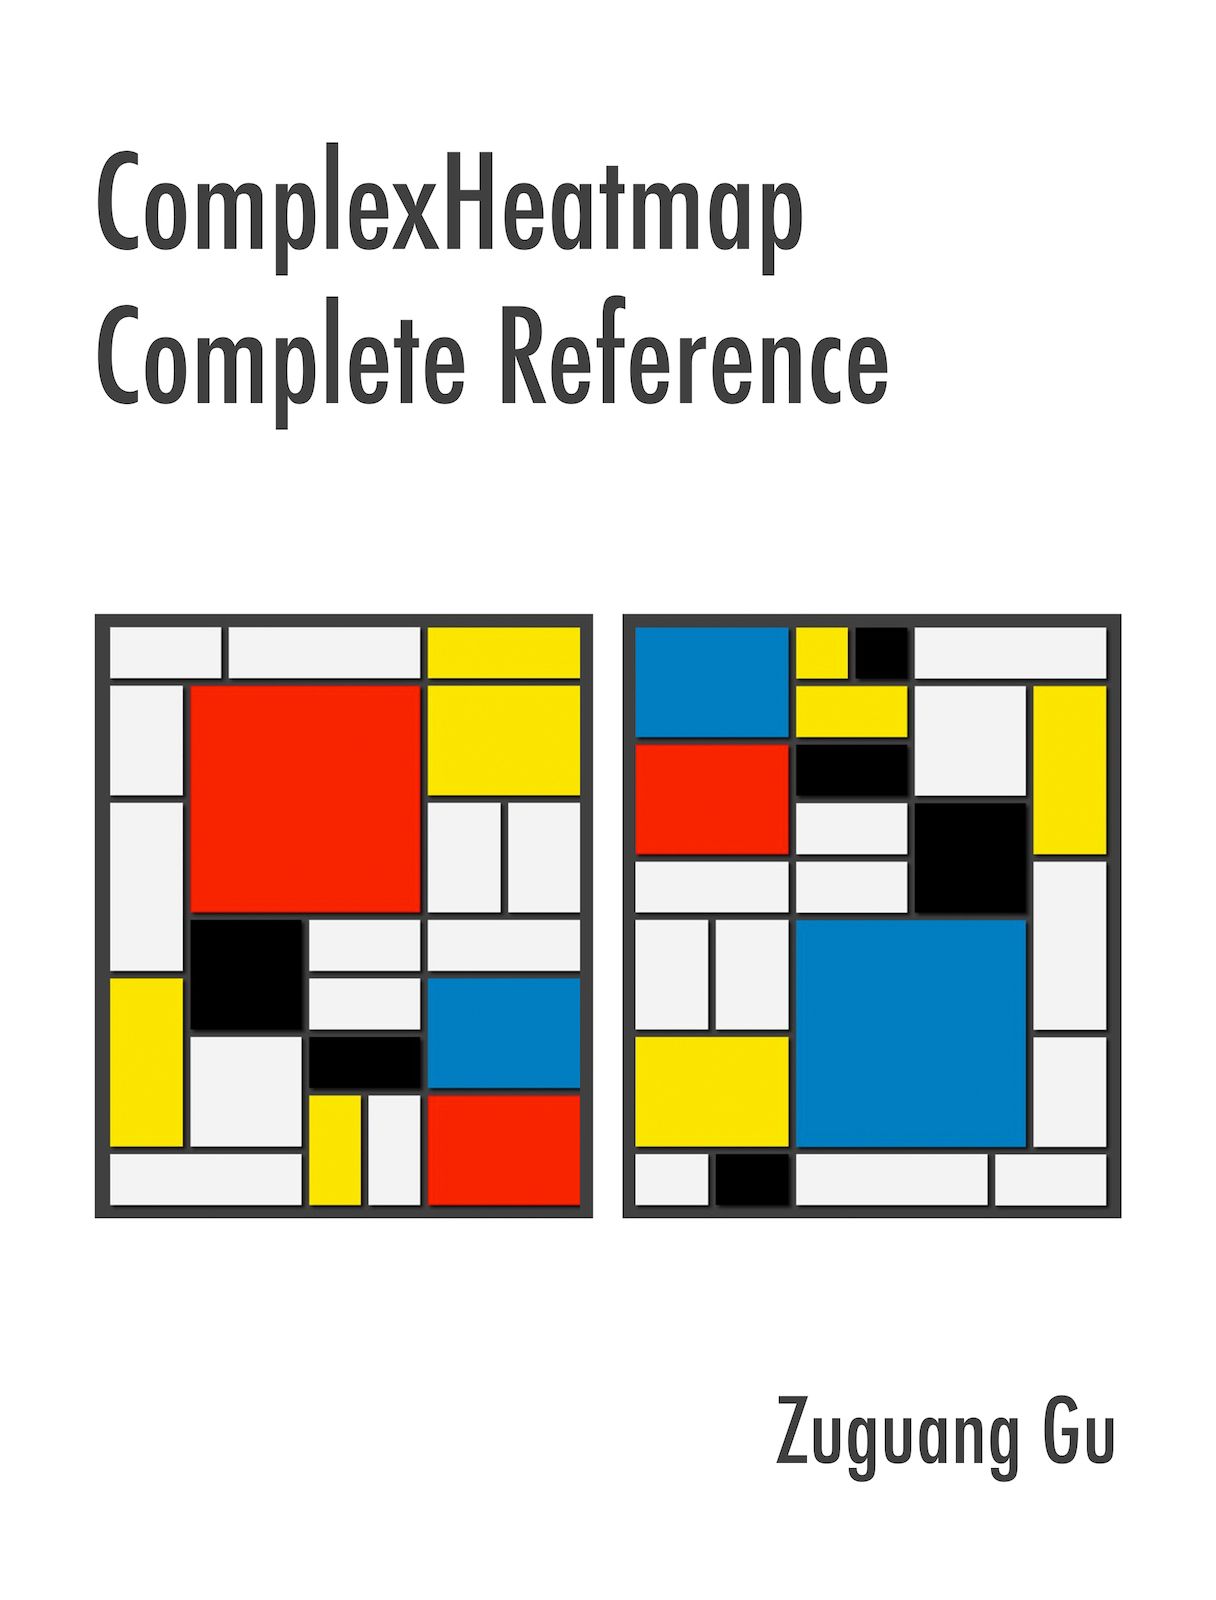 Cover of the ComplexHeatmap complete reference book